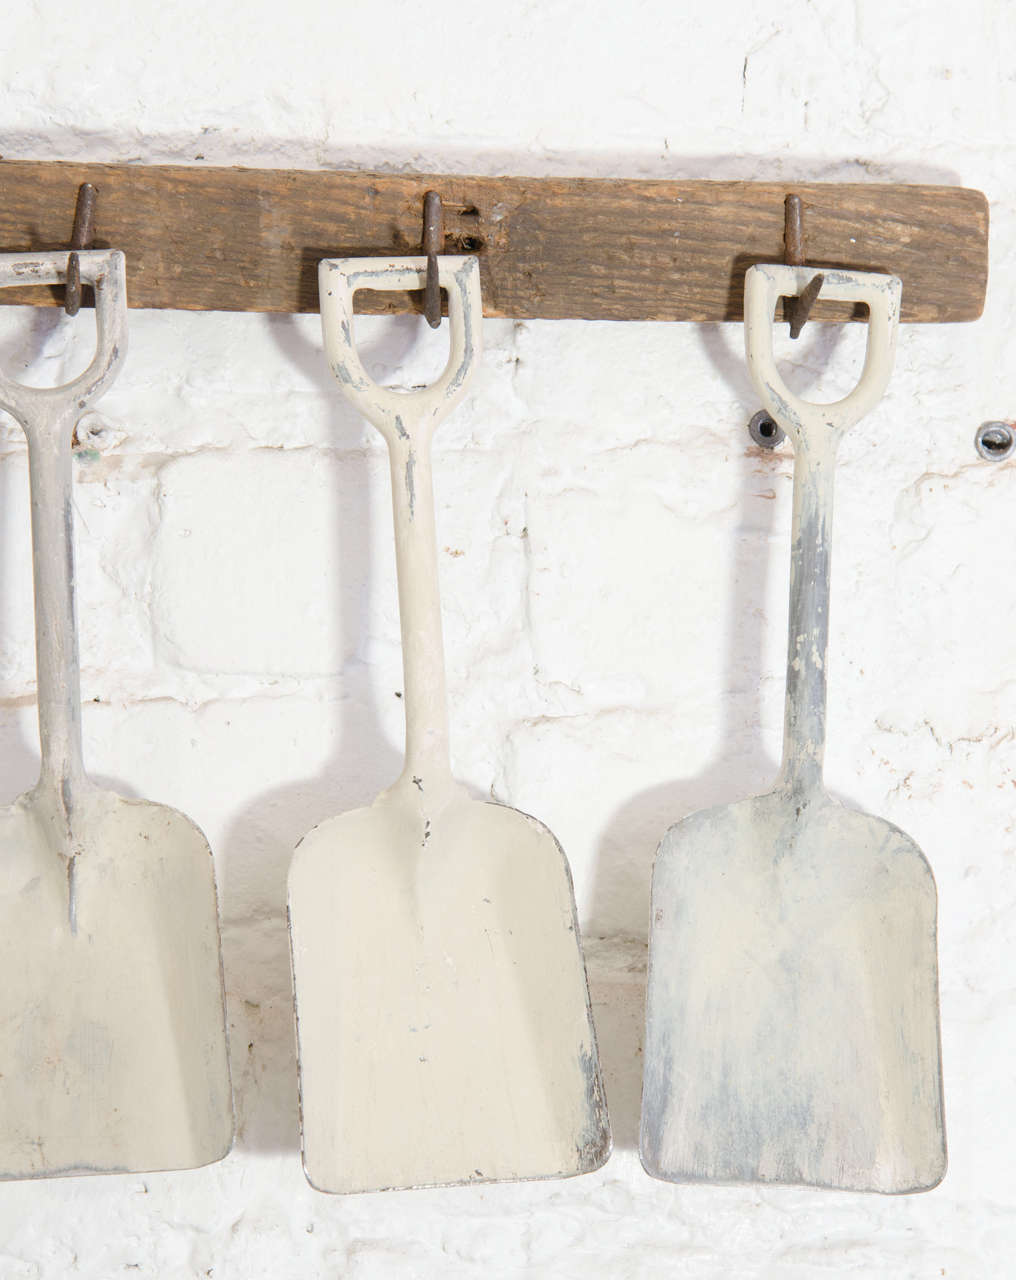 Mid-20th Century White Sandshovels Suspended from Wooden Rack with Iron Hasps